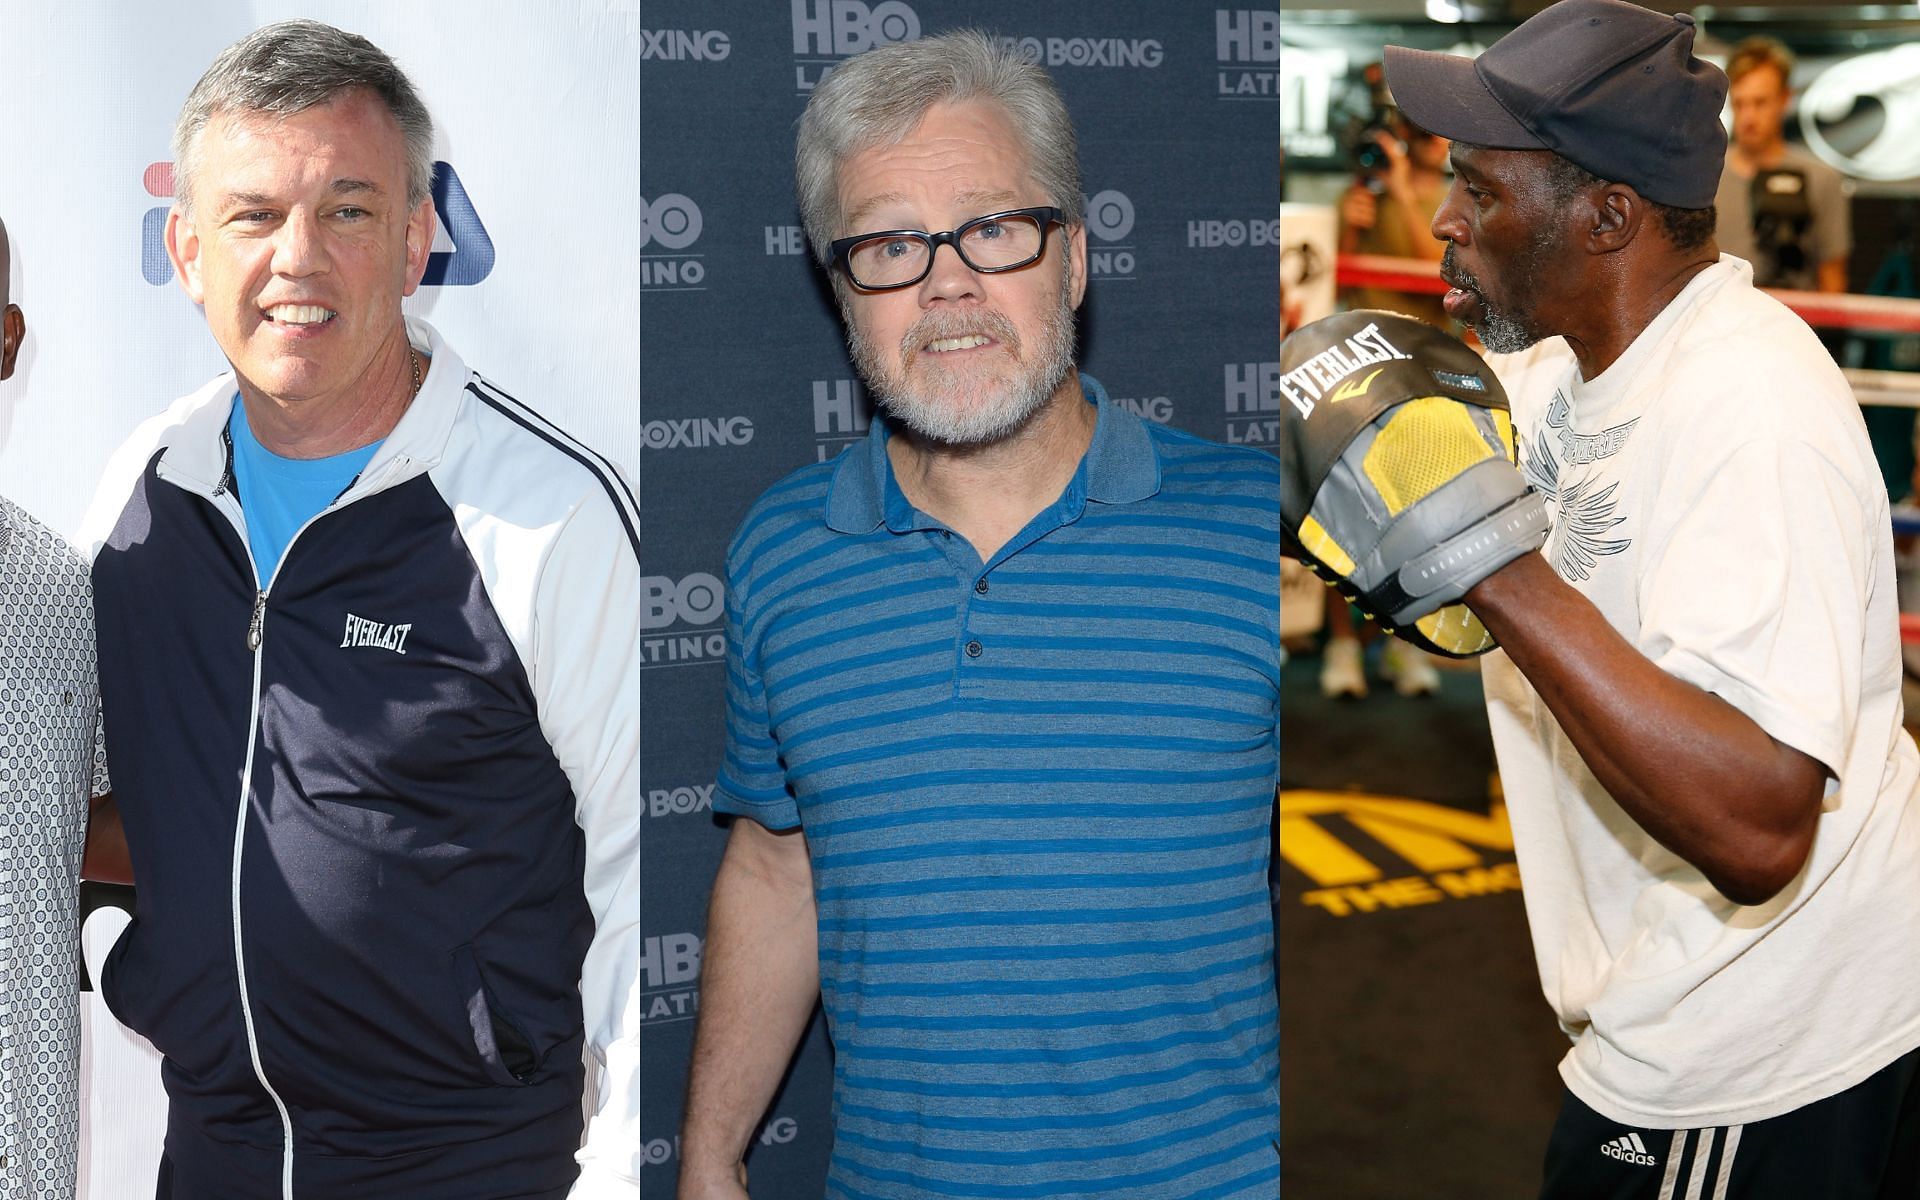 Teddy Atlas (left), Freddie Roach (middle), and Roger Mayweather (right) have time and again been hailed for their stellar work as boxing coaches [Images courtesy: Getty Images]